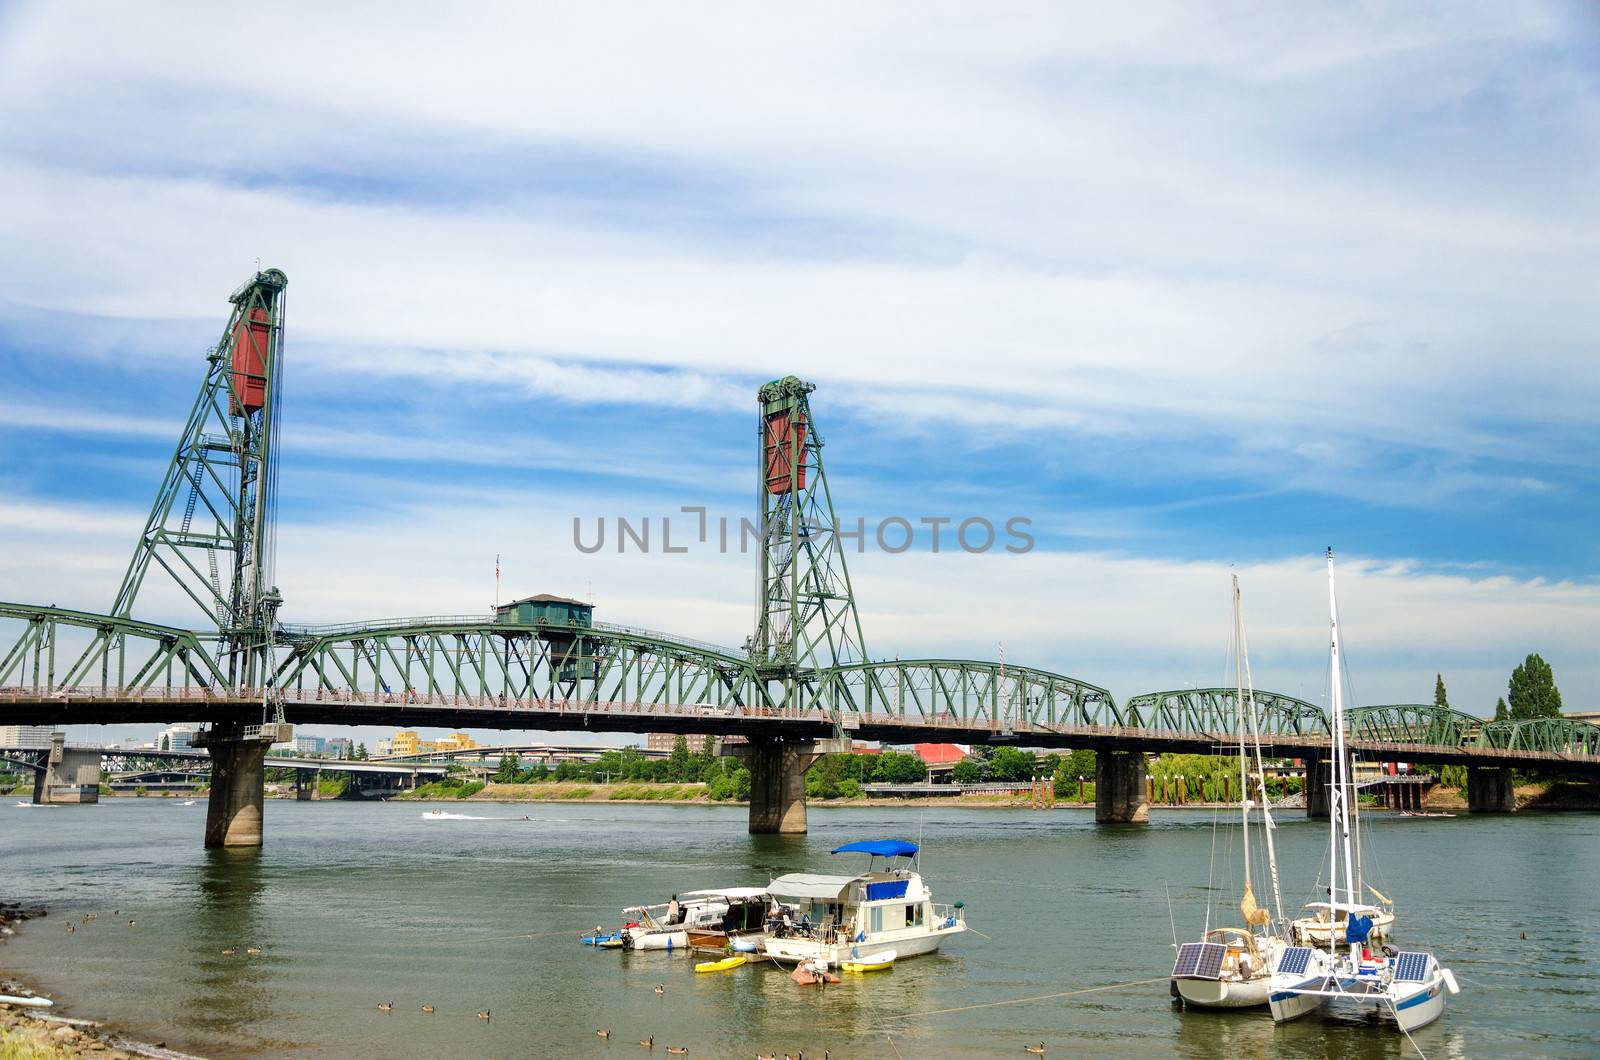 Hawthorne Bridge in Portland, Oregon and view of the Willamette River with several boats in the foreground